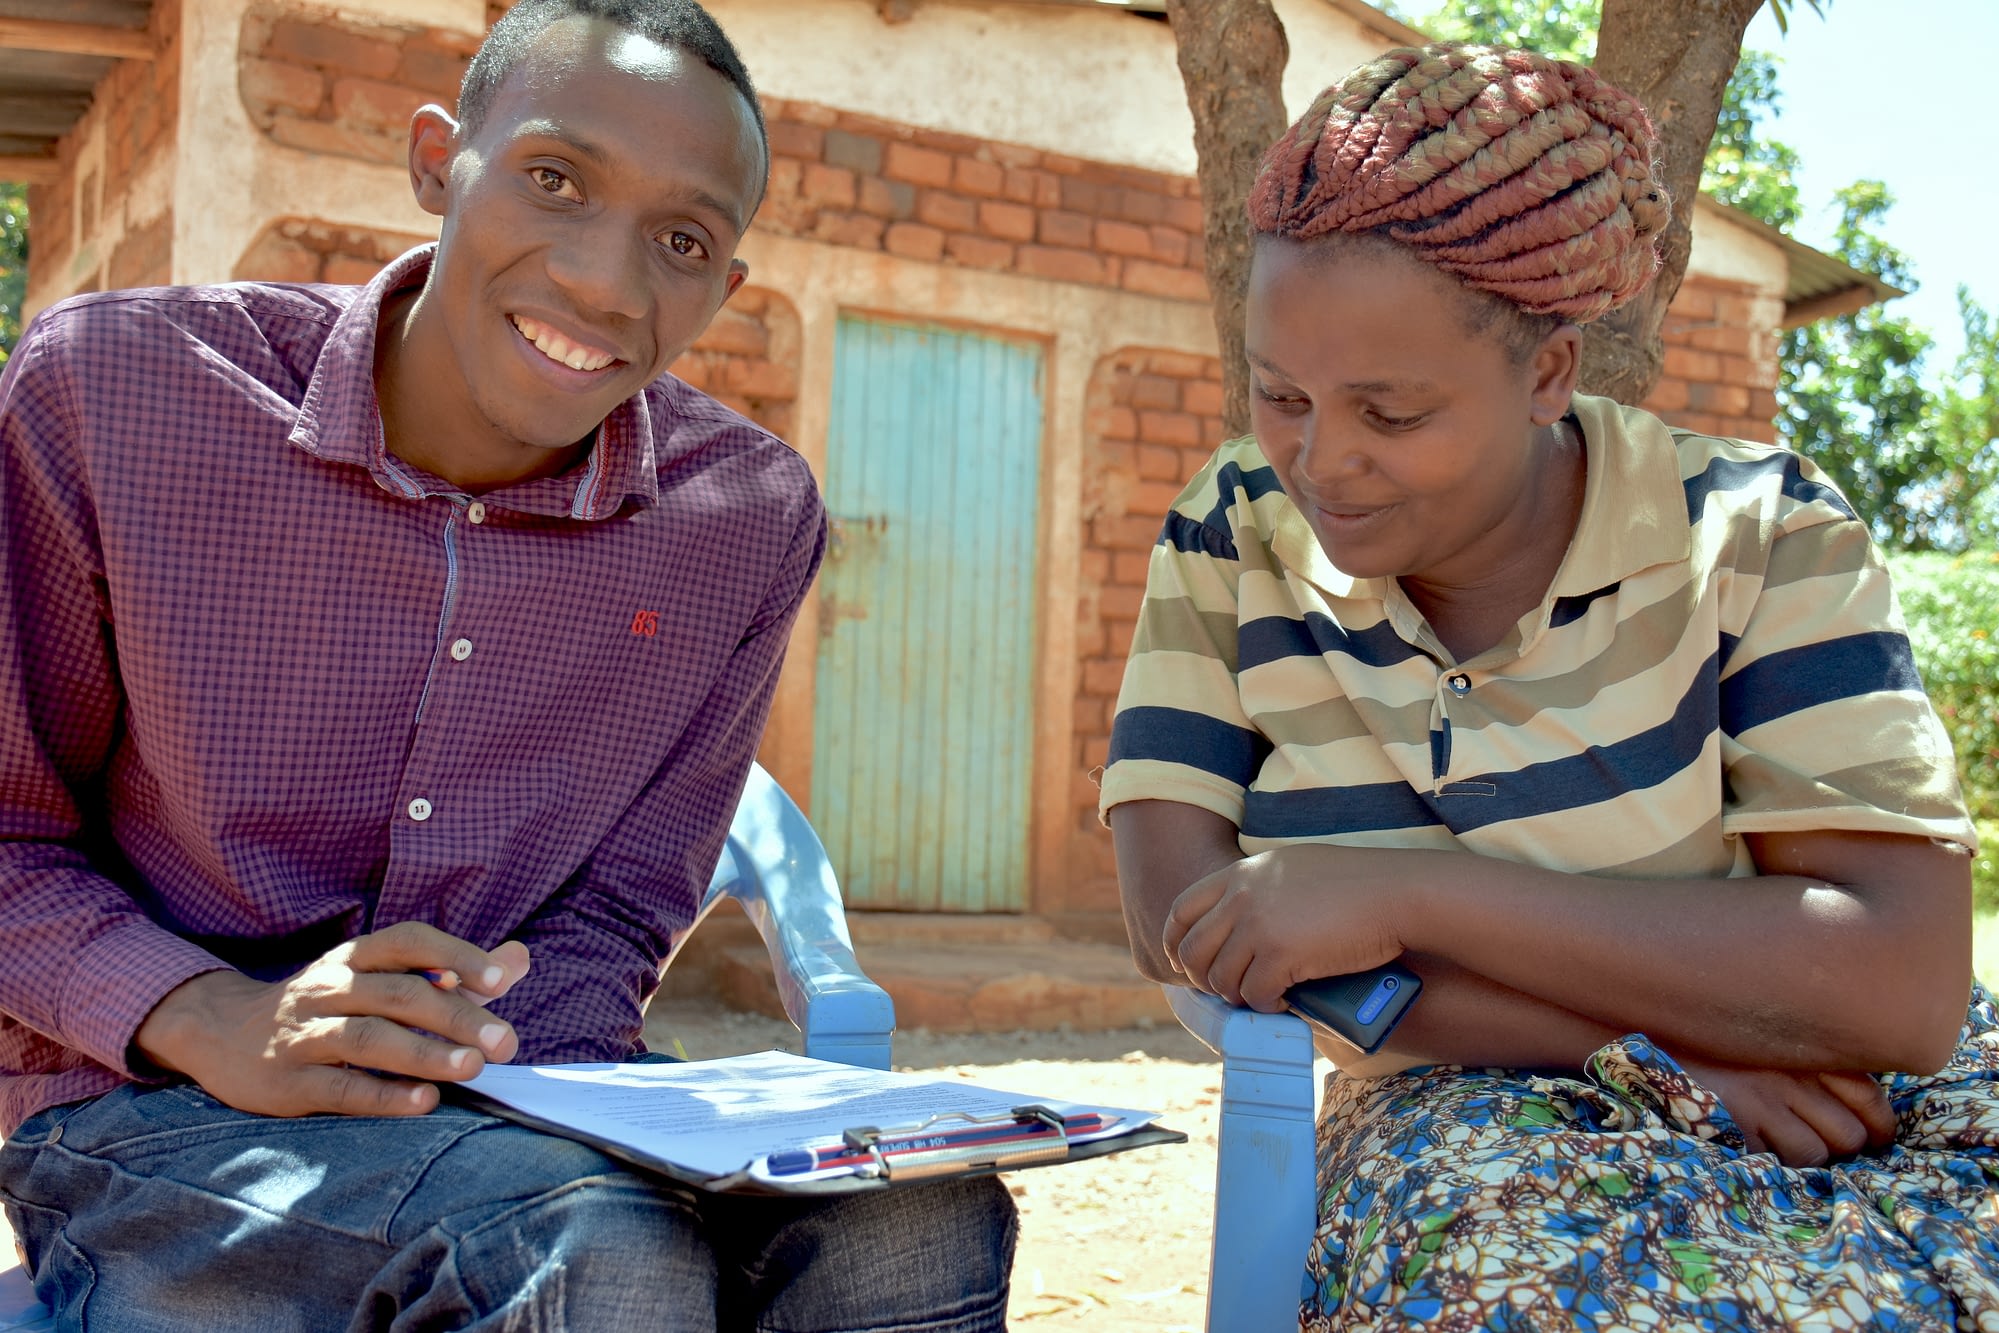 An enumerator (left) collects a farmer’s details and socioeconomic data before she participates in the evaluation of maize varieties. (Photo: Joshua Masinde/CIMMYT)